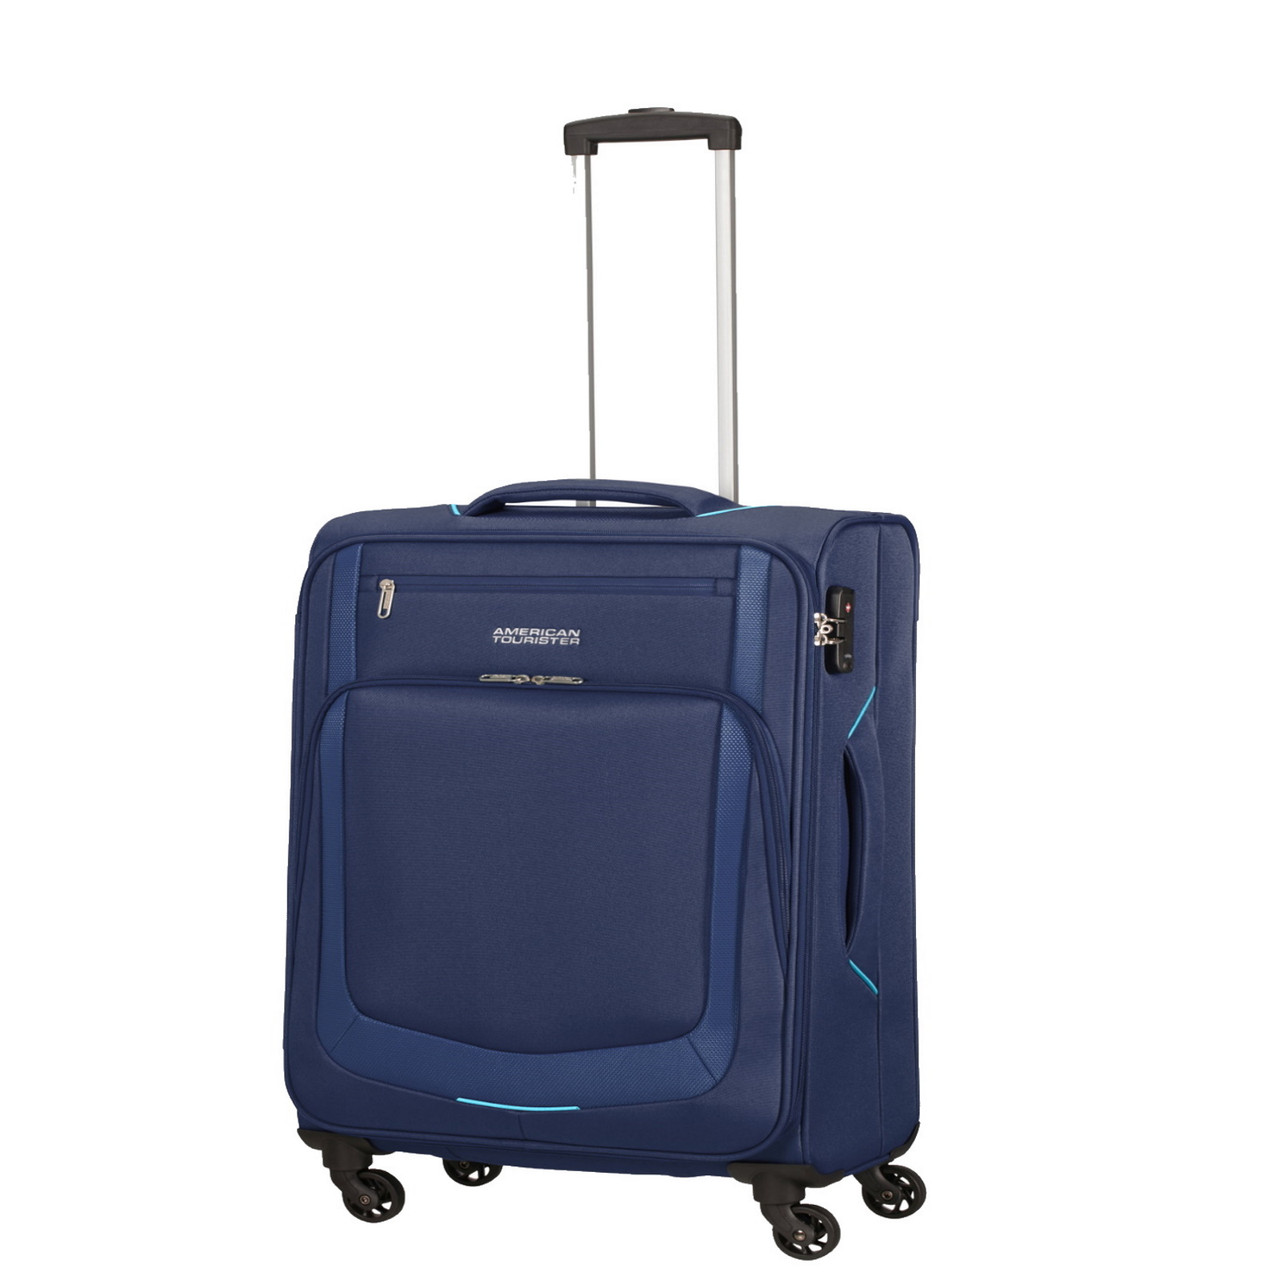 American Tourister Session 55cm Cabin Case at Superstore